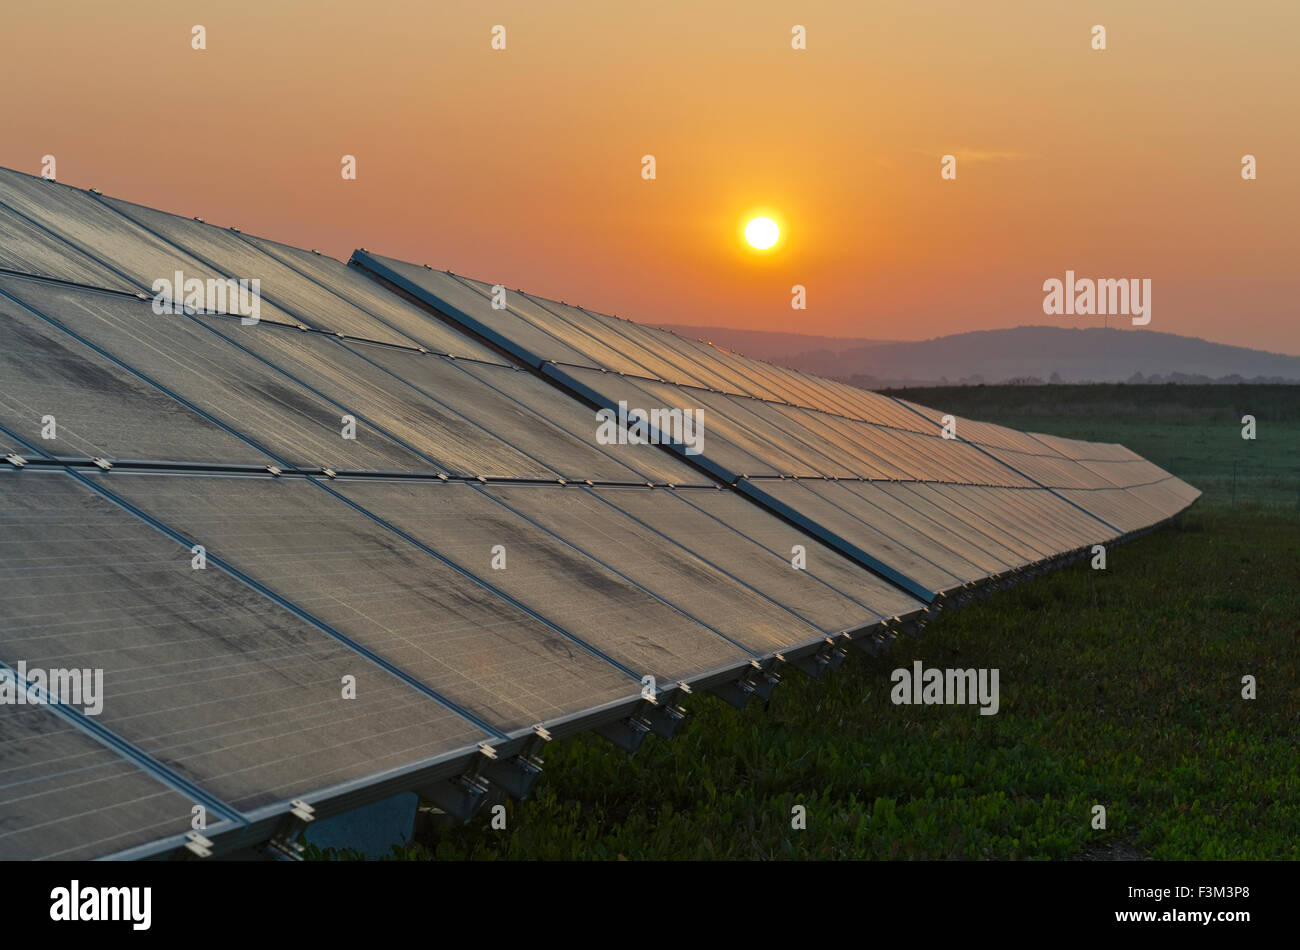 Photovoltaik solar panels in a row at sunrise Stock Photo